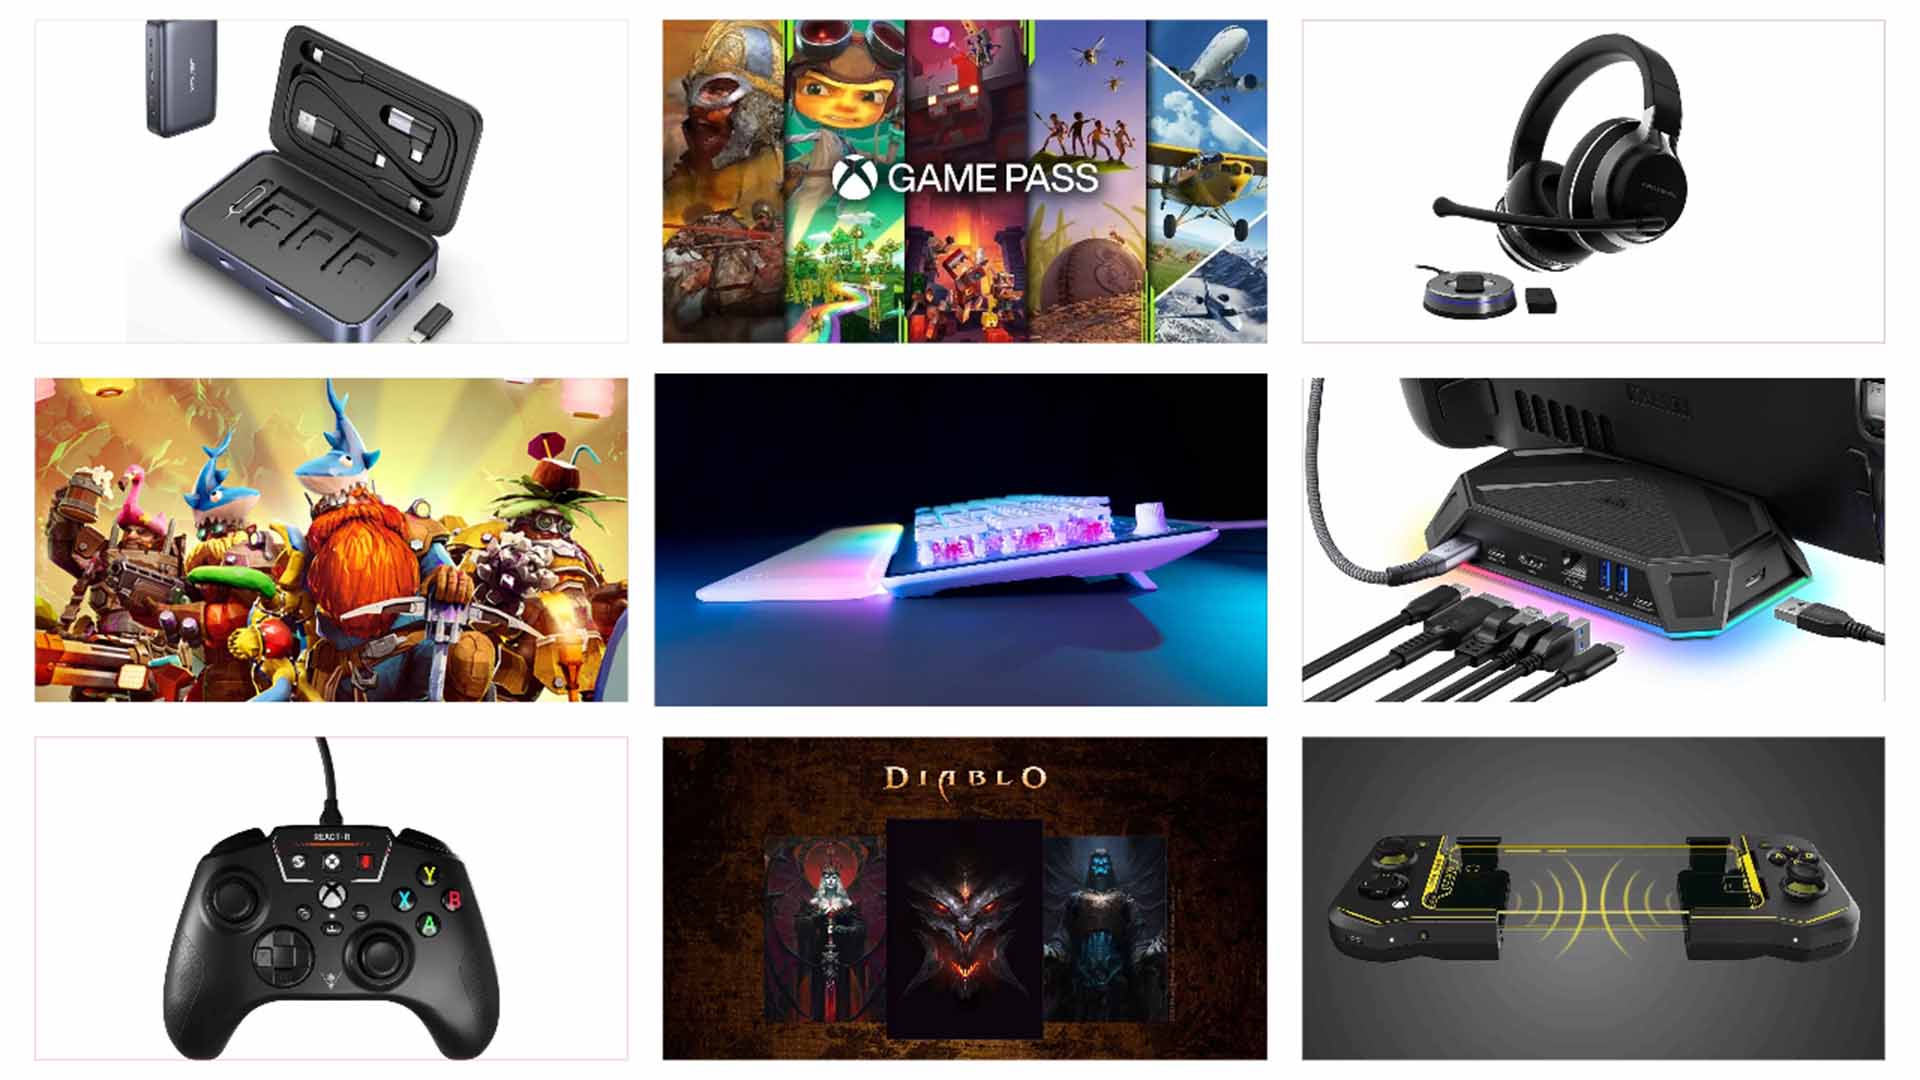 Best gifts for gamers: Christmas 2023